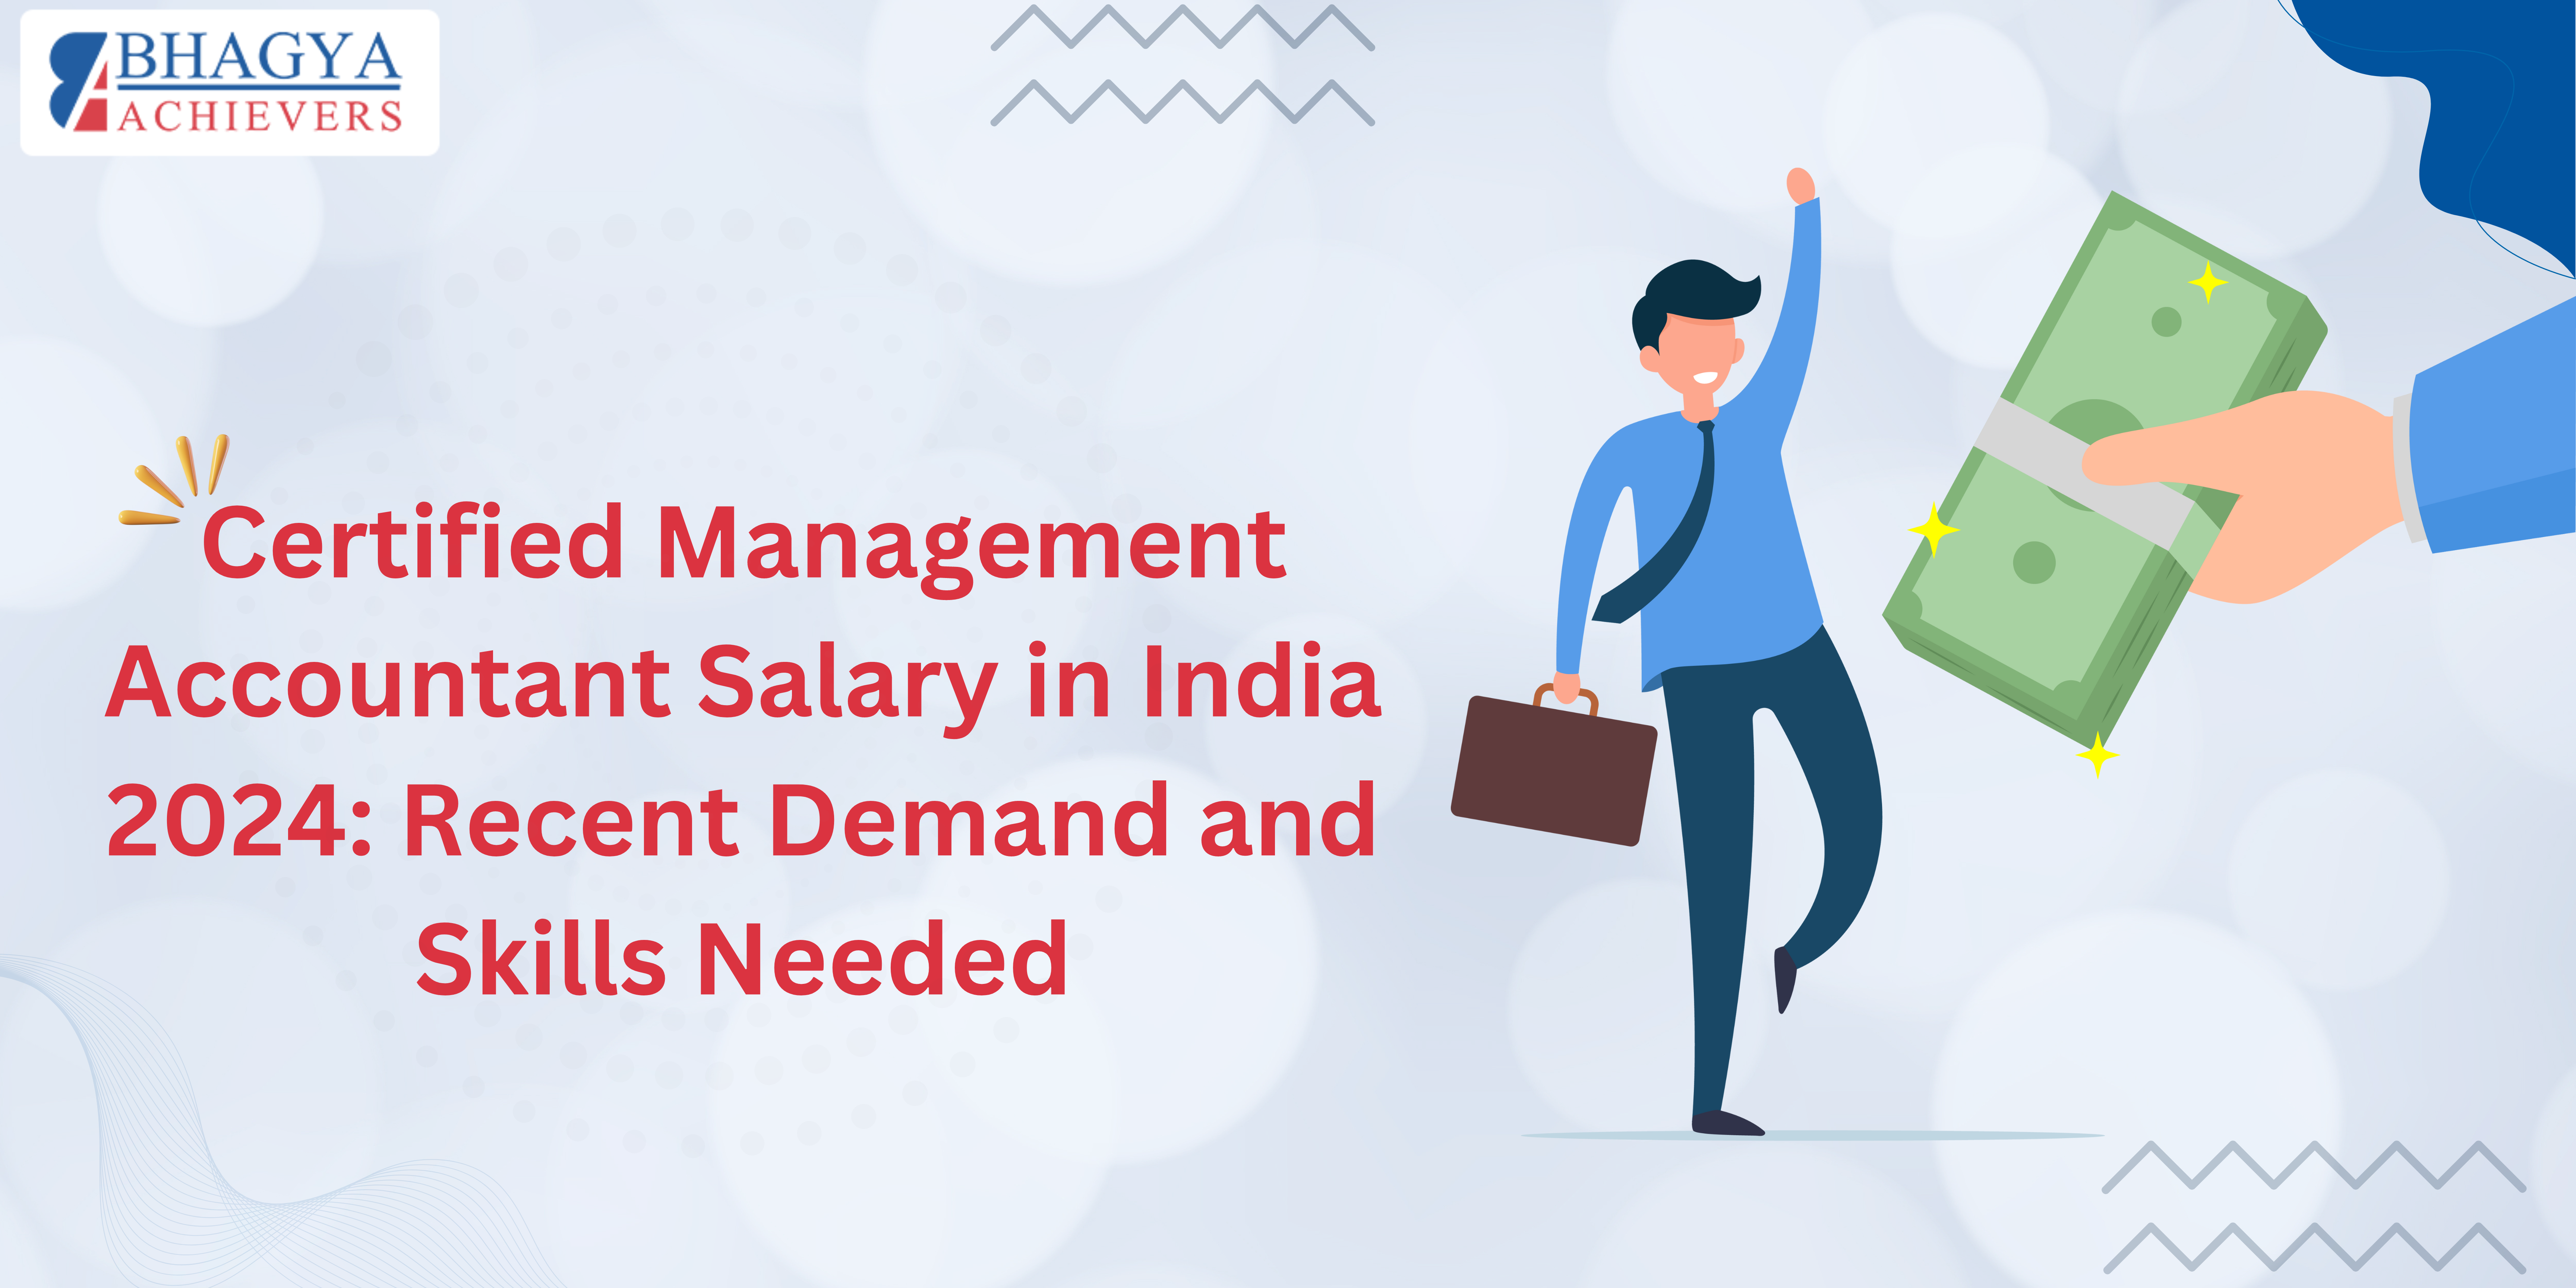 Certified Management Accountant Salary in India 2024: Recent Demand and Skills Needed - Bhagya Achievers